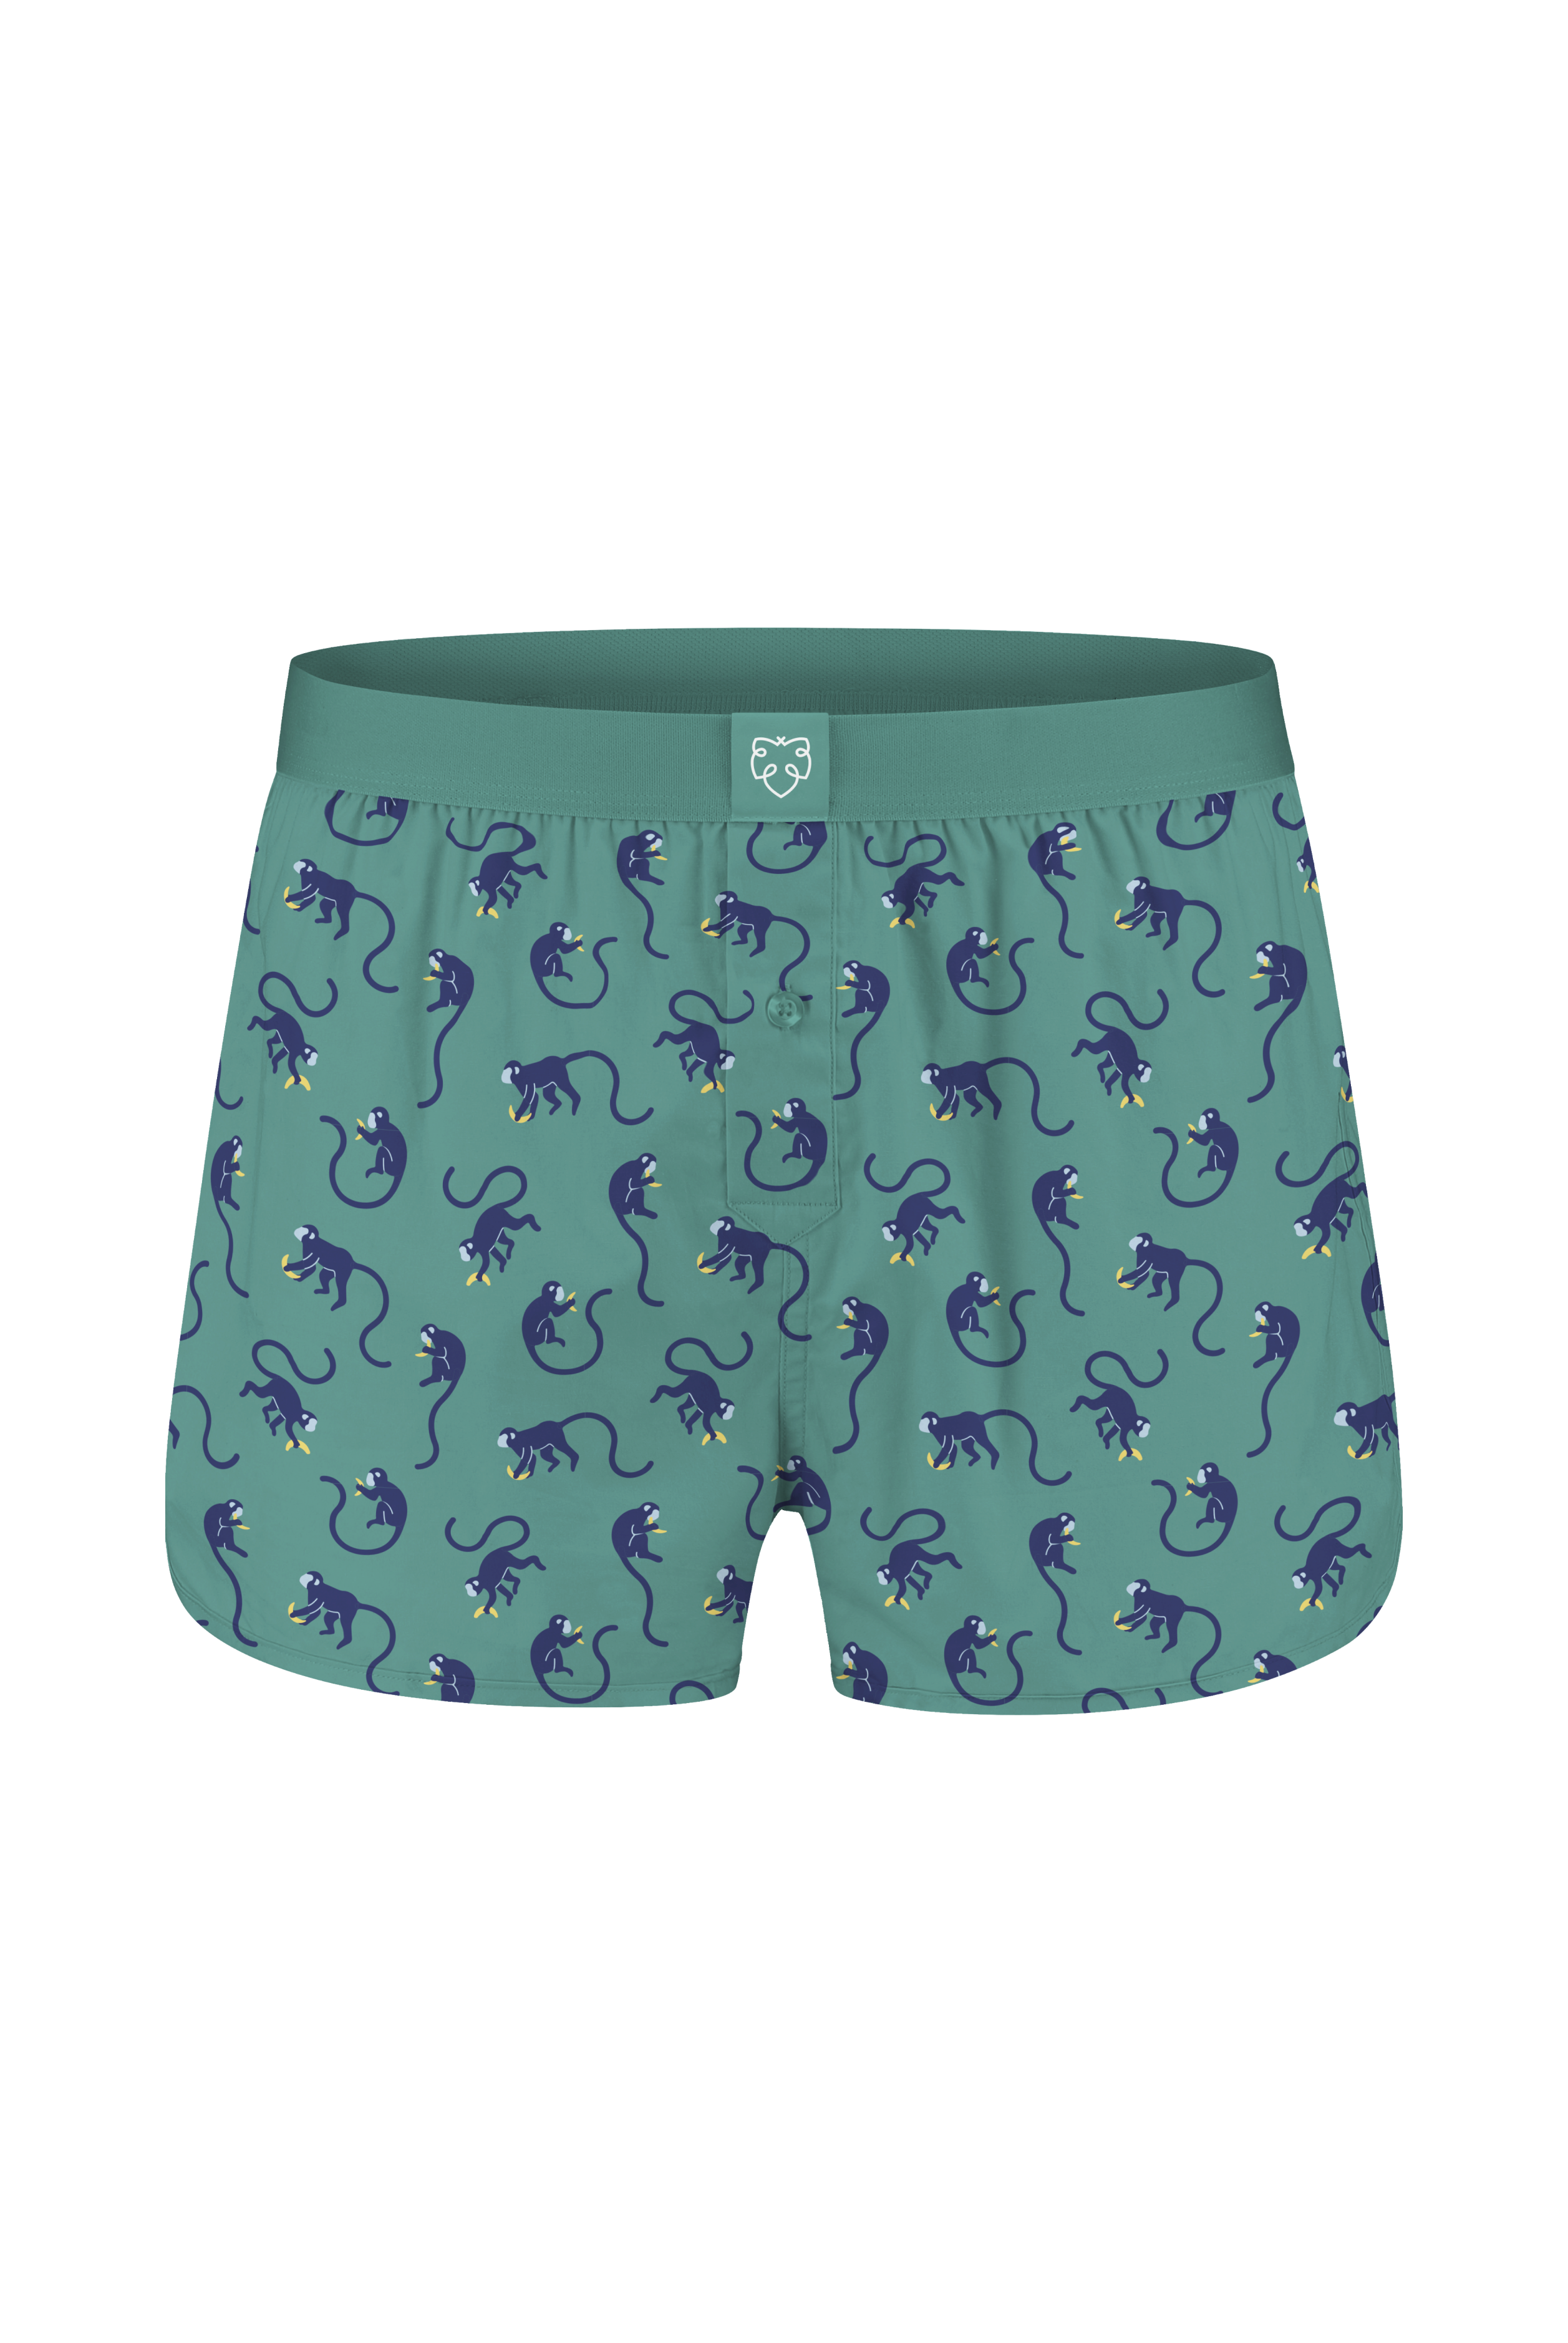 A-dam 3x blue boxers with print from GOTS organic cotton